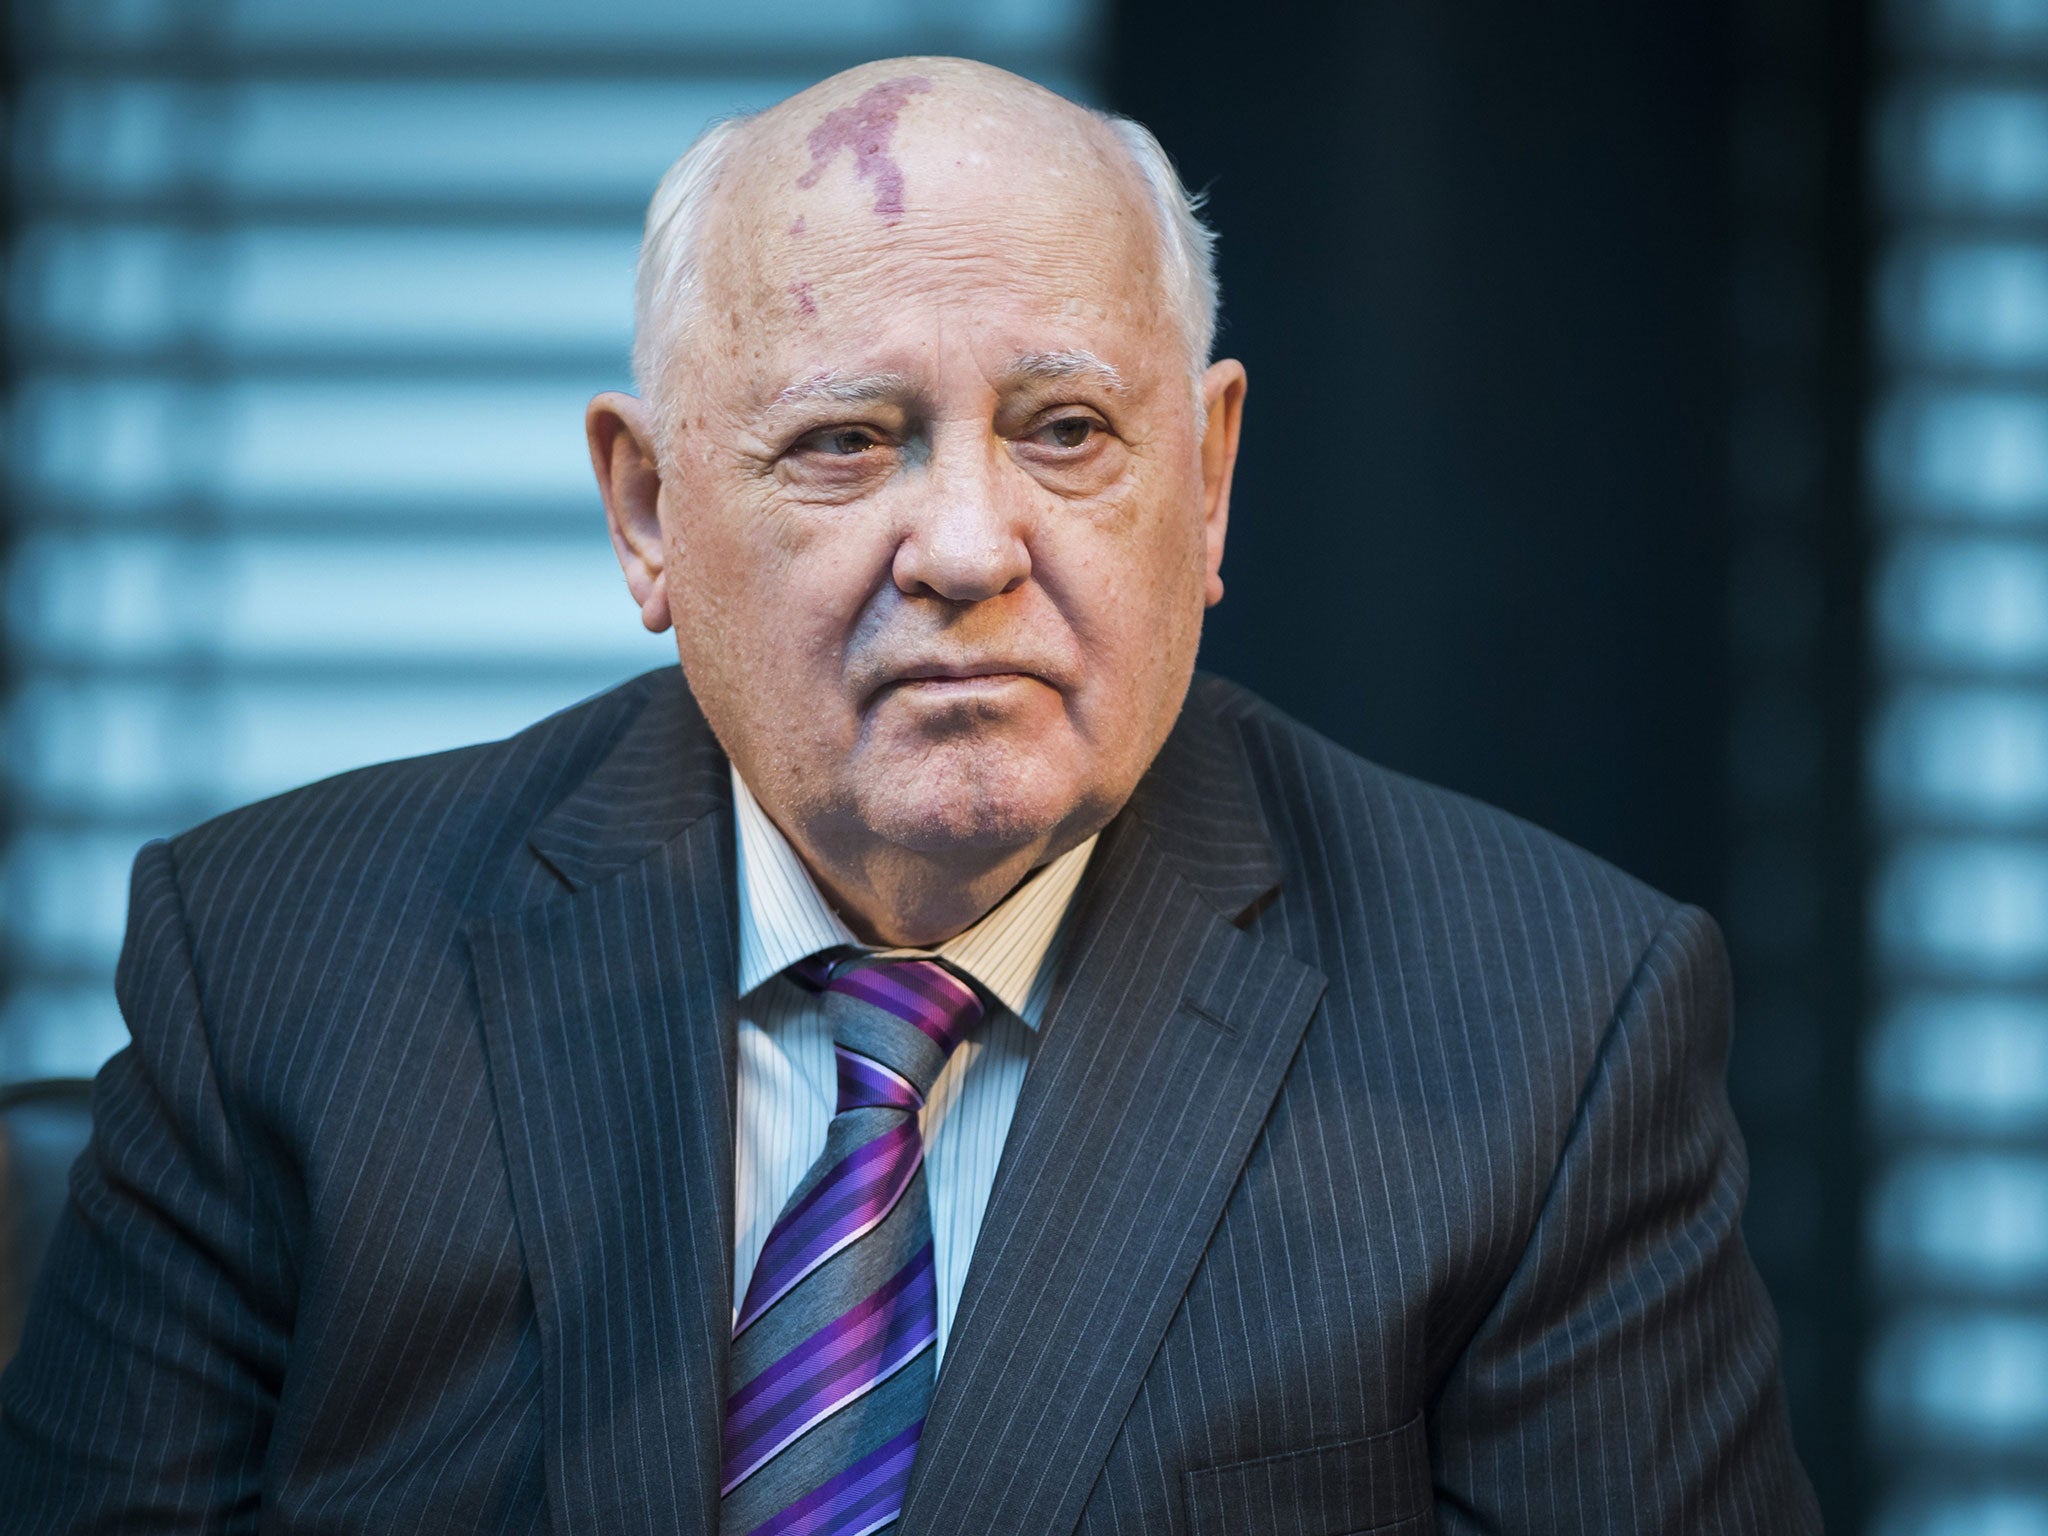 Mikhail Gorbachev’s reforms quickly spread across eastern Europe